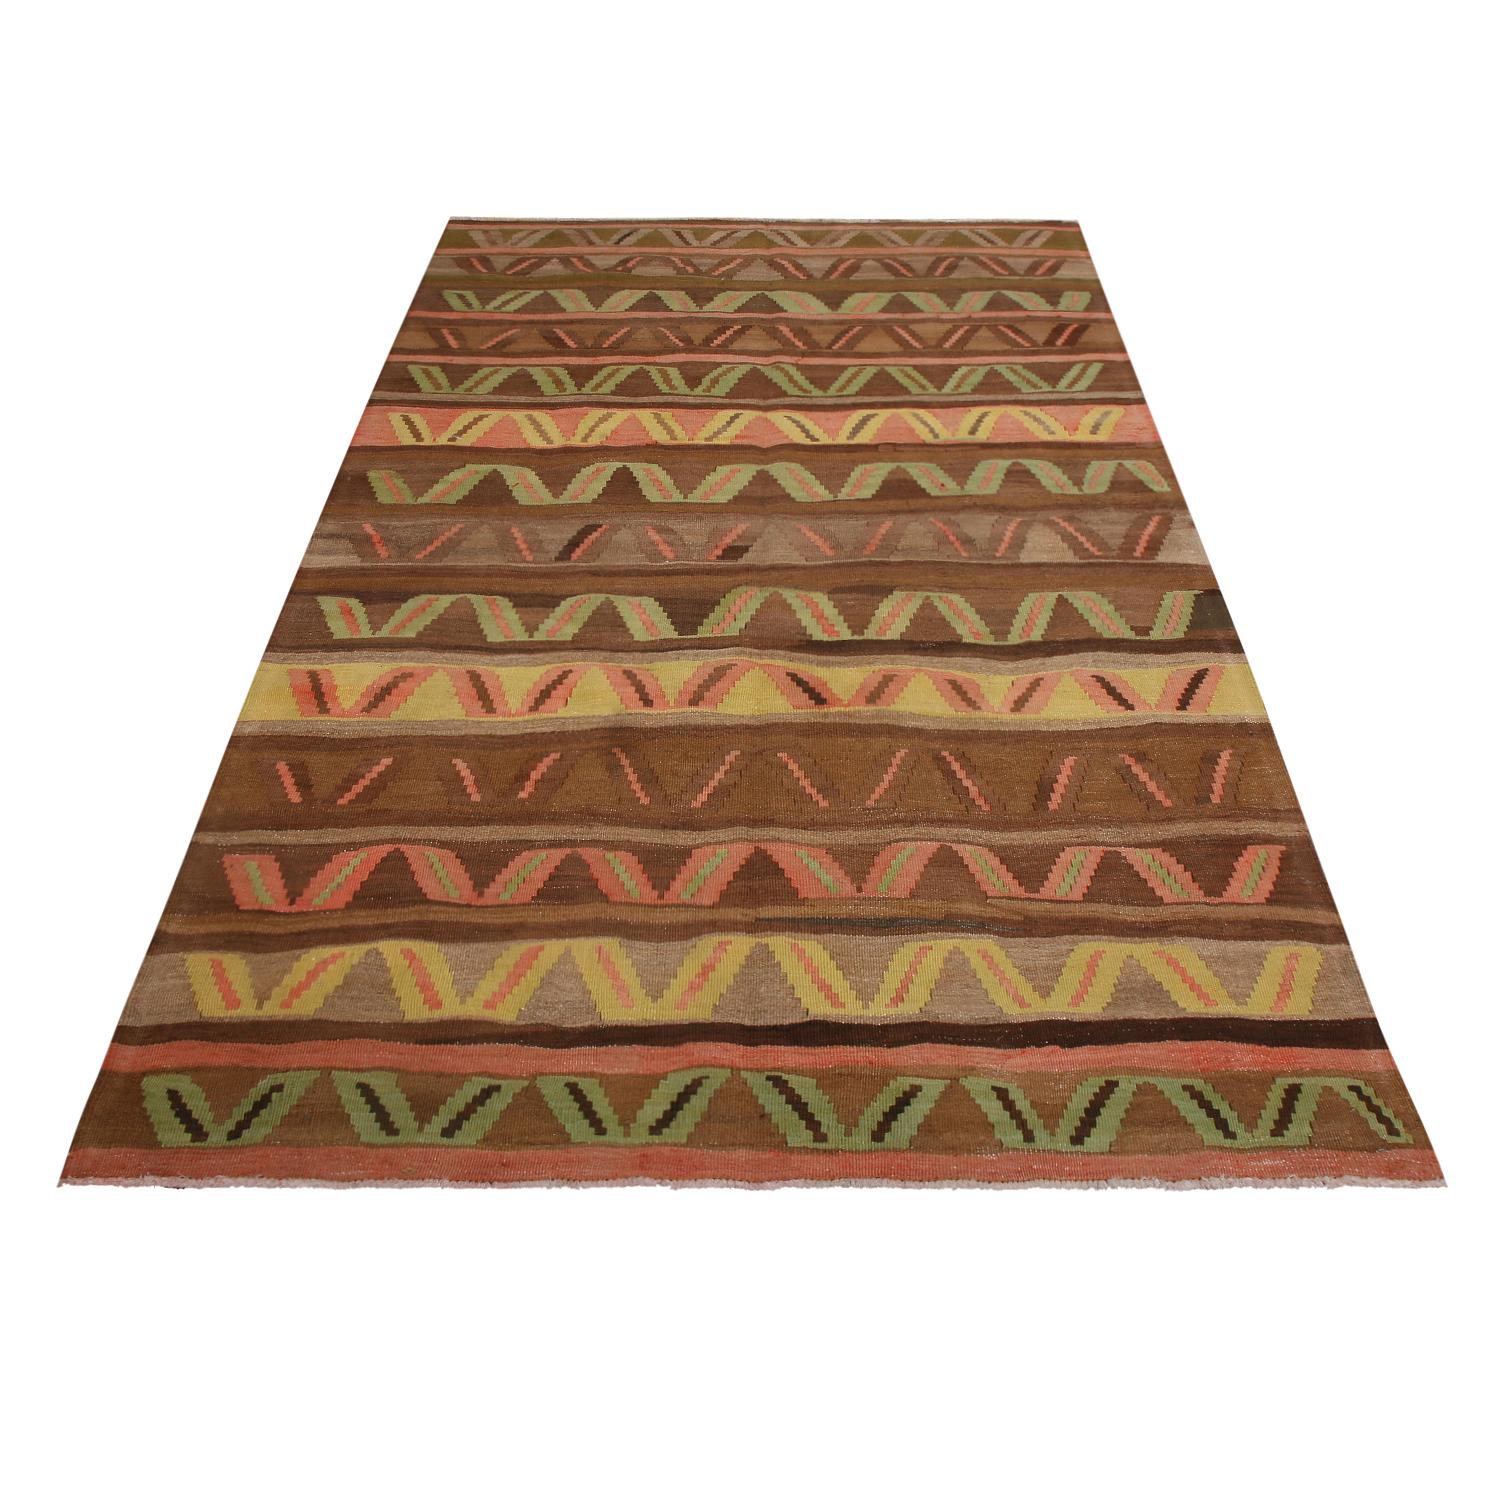 flat-woven in Turkey originating between 1950-1960, this vintage midcentury wool Kilim hails from the city of Kars, enjoying subtly abrashed variations of brown with lively accents of green, yellow, and pink-red; a marriage of earth tones and bright